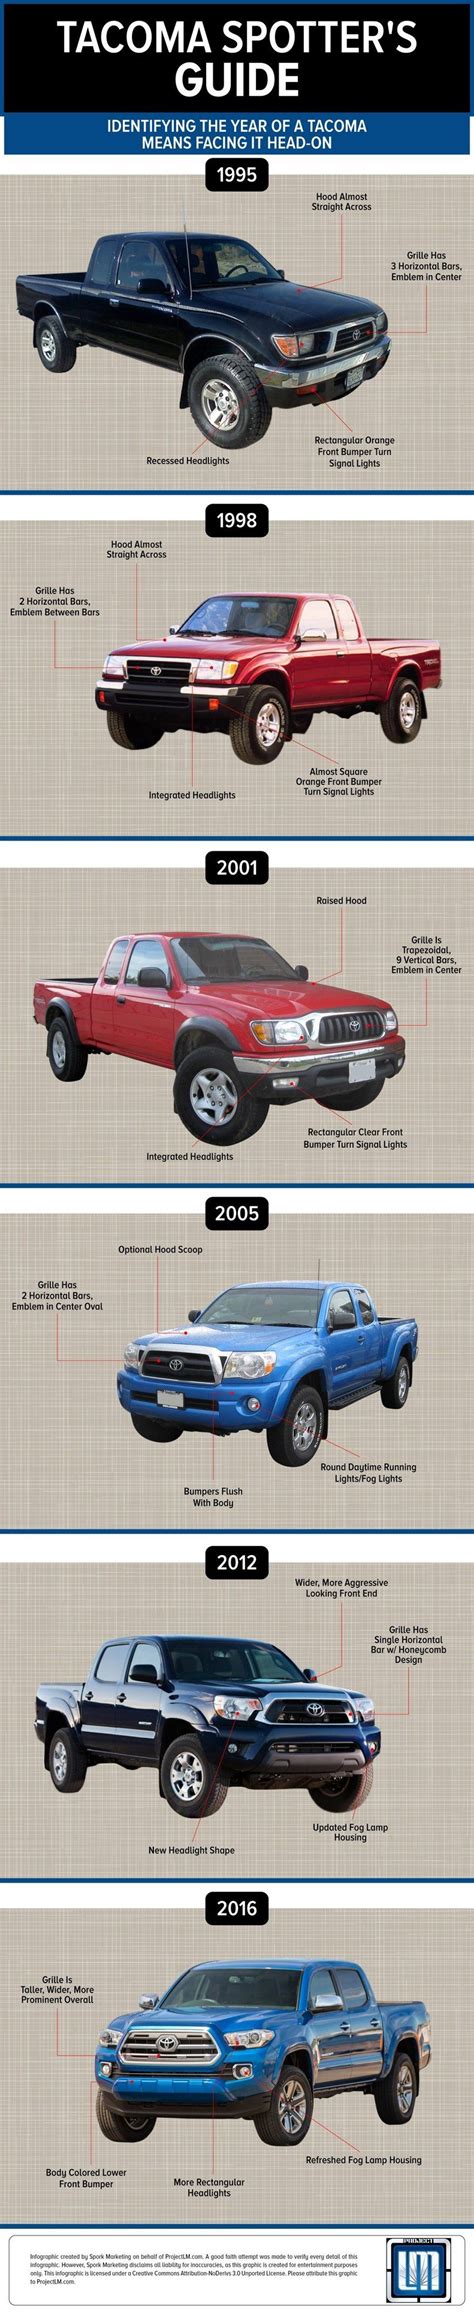 Toyota Tacoma Guide How To Tell What Year A Tacoma Was Made